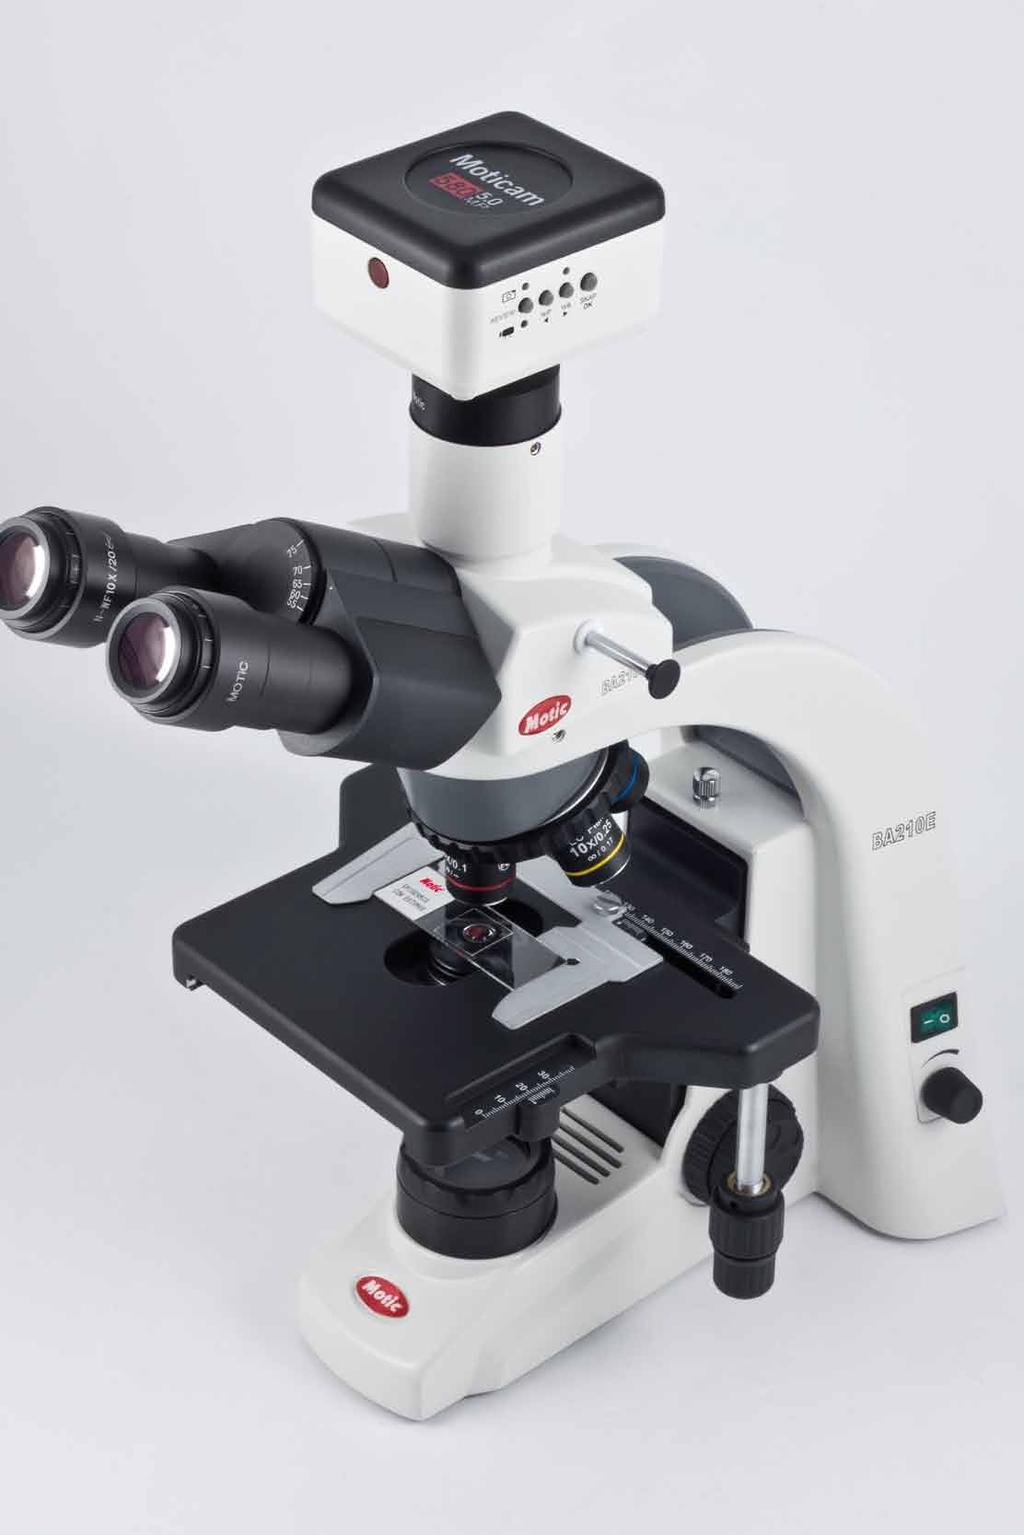 The importance of documentation has expanded into every aspect of microscopy. The BA210E is accessible by the traditional method (photomicrography) and the C-mount camera approach.